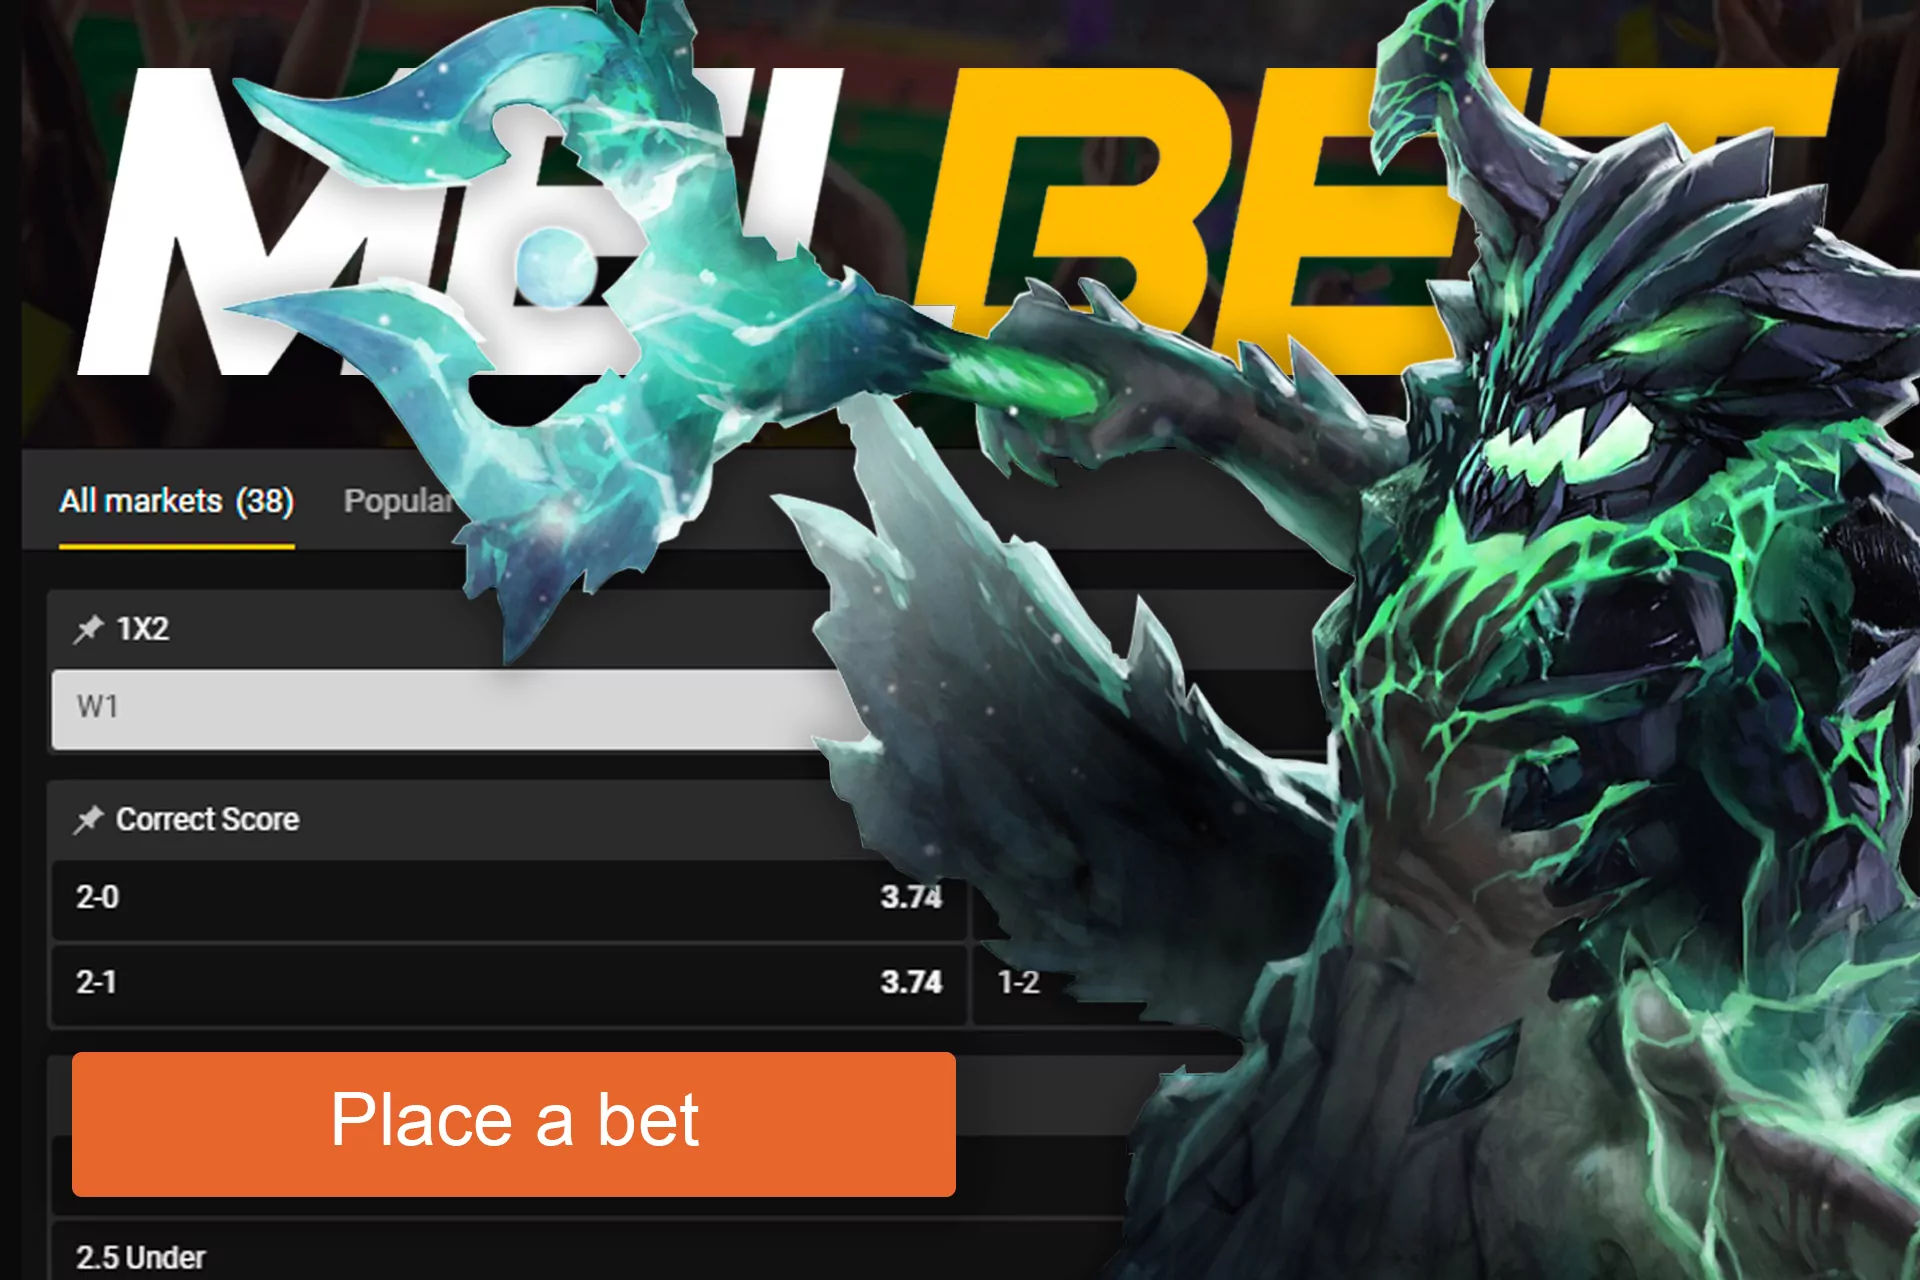 If you want to place a bet on a match of LoL, you should look through the list of events and choose one.